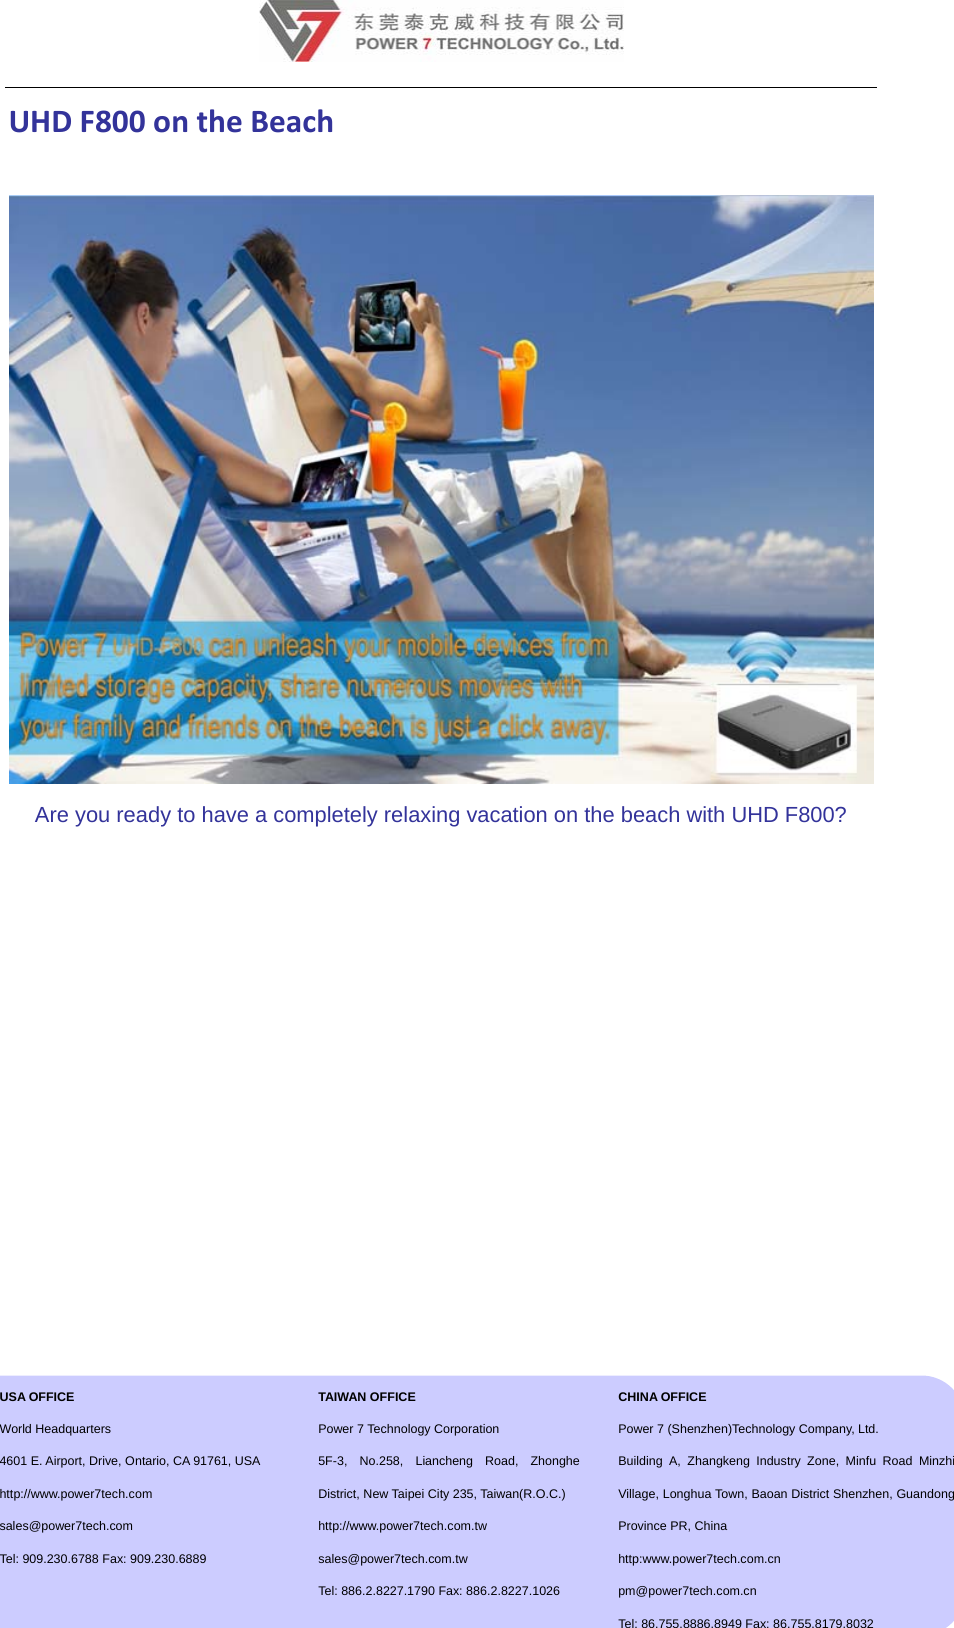 12UHDF800ontheBeach Are you ready to have a completely relaxing vacation on the beach with UHD F800?               USA OFFICE  World Headquarters 4601 E. Airport, Drive, Ontario, CA 91761, USA http://www.power7tech.com  sales@power7tech.com Tel: 909.230.6788 Fax: 909.230.6889  TAIWAN OFFICE Power 7 Technology Corporation 5F-3, No.258, Liancheng Road, Zhonghe District, New Taipei City 235, Taiwan(R.O.C.) http://www.power7tech.com.tw sales@power7tech.com.tw Tel: 886.2.8227.1790 Fax: 886.2.8227.1026 CHINA OFFICE Power 7 (Shenzhen)Technology Company, Ltd. Building A, Zhangkeng Industry Zone, Minfu Road Minzhi Village, Longhua Town, Baoan District Shenzhen, Guandong Province PR, China http:www.power7tech.com.cn      pm@power7tech.com.cn Tel: 86.755.8886.8949 Fax: 86.755.8179.8032